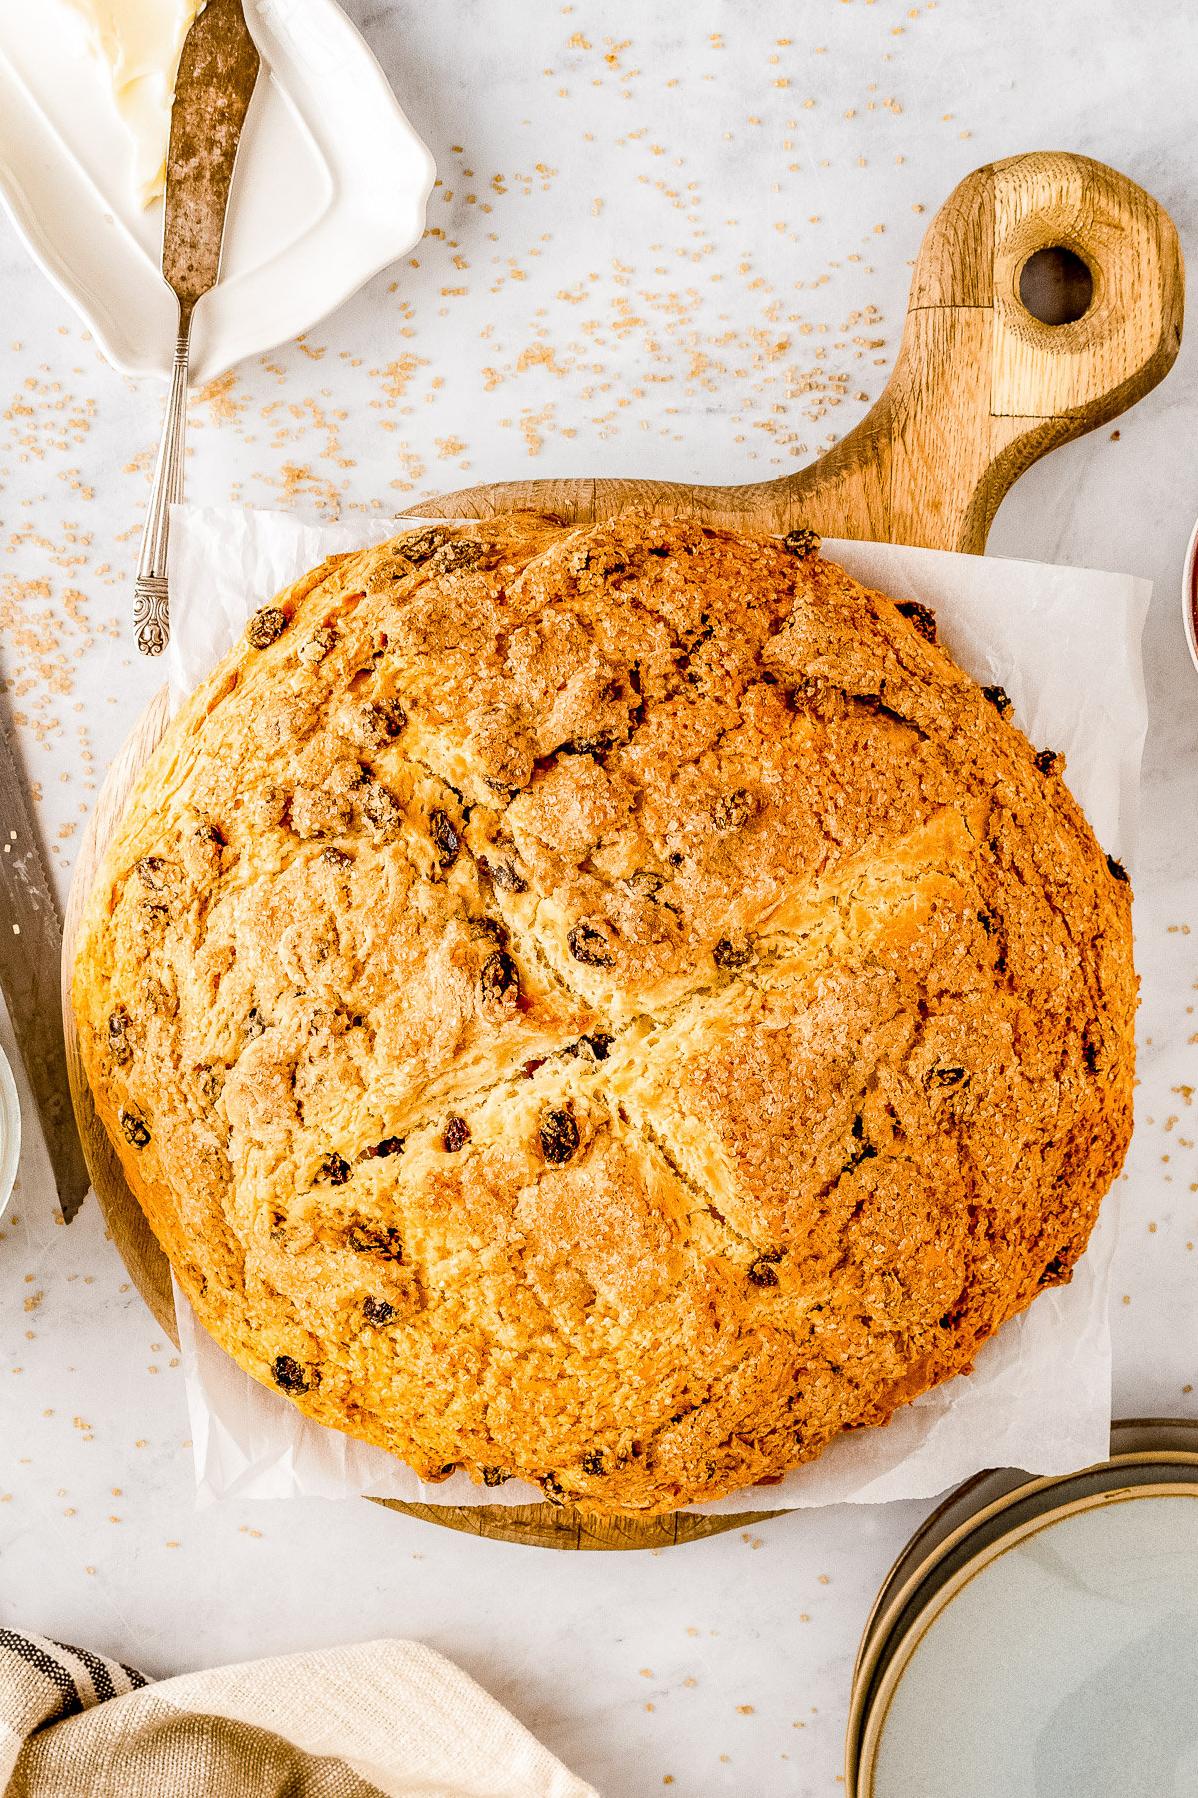  Warm, delightfully twisted soda bread fresh from the oven!